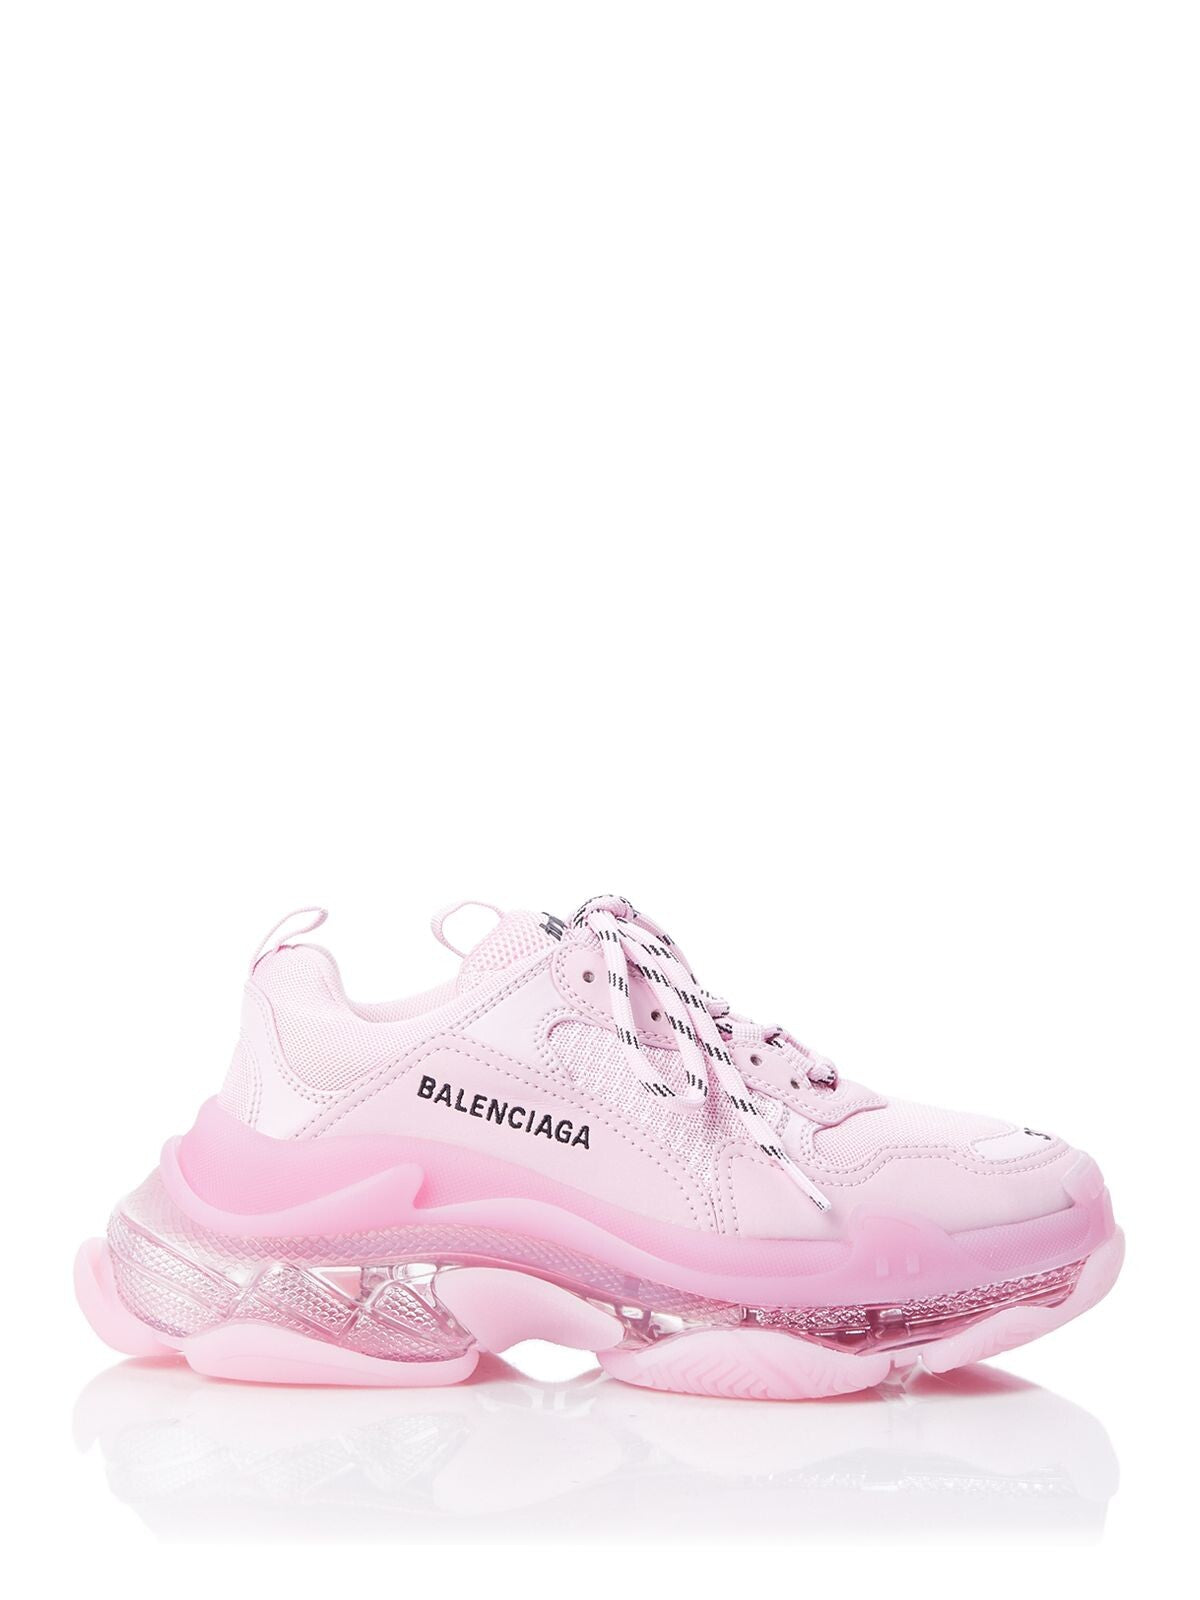 BALENCIAGA Womens Pink Logo Removable Insole Comfort Triple S Round Toe Lace-Up Athletic Sneakers Shoes 4